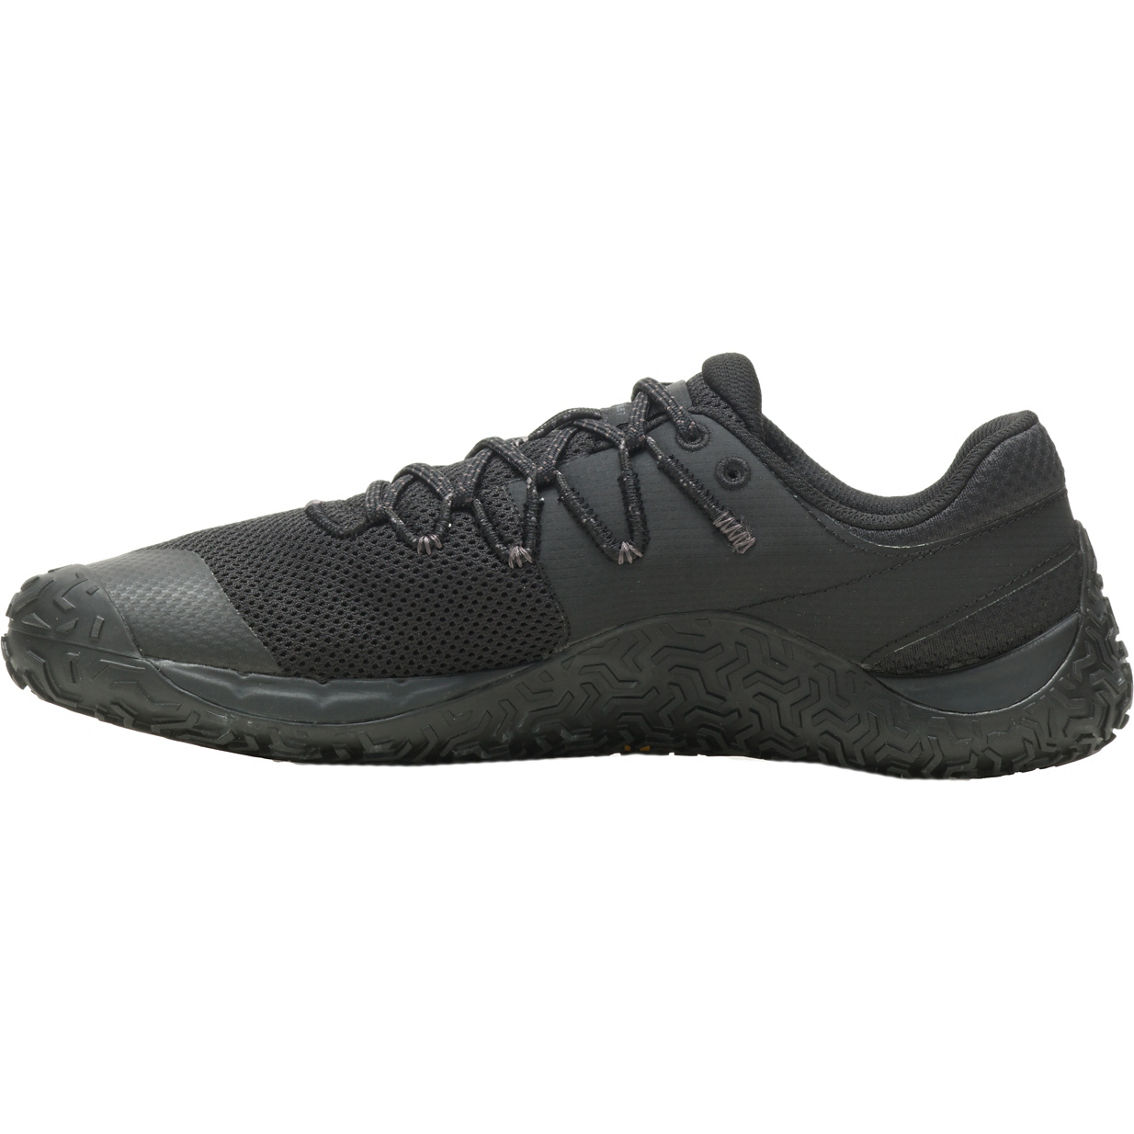 Merrell Men's Trail Glove 7 Shoes - Image 3 of 6